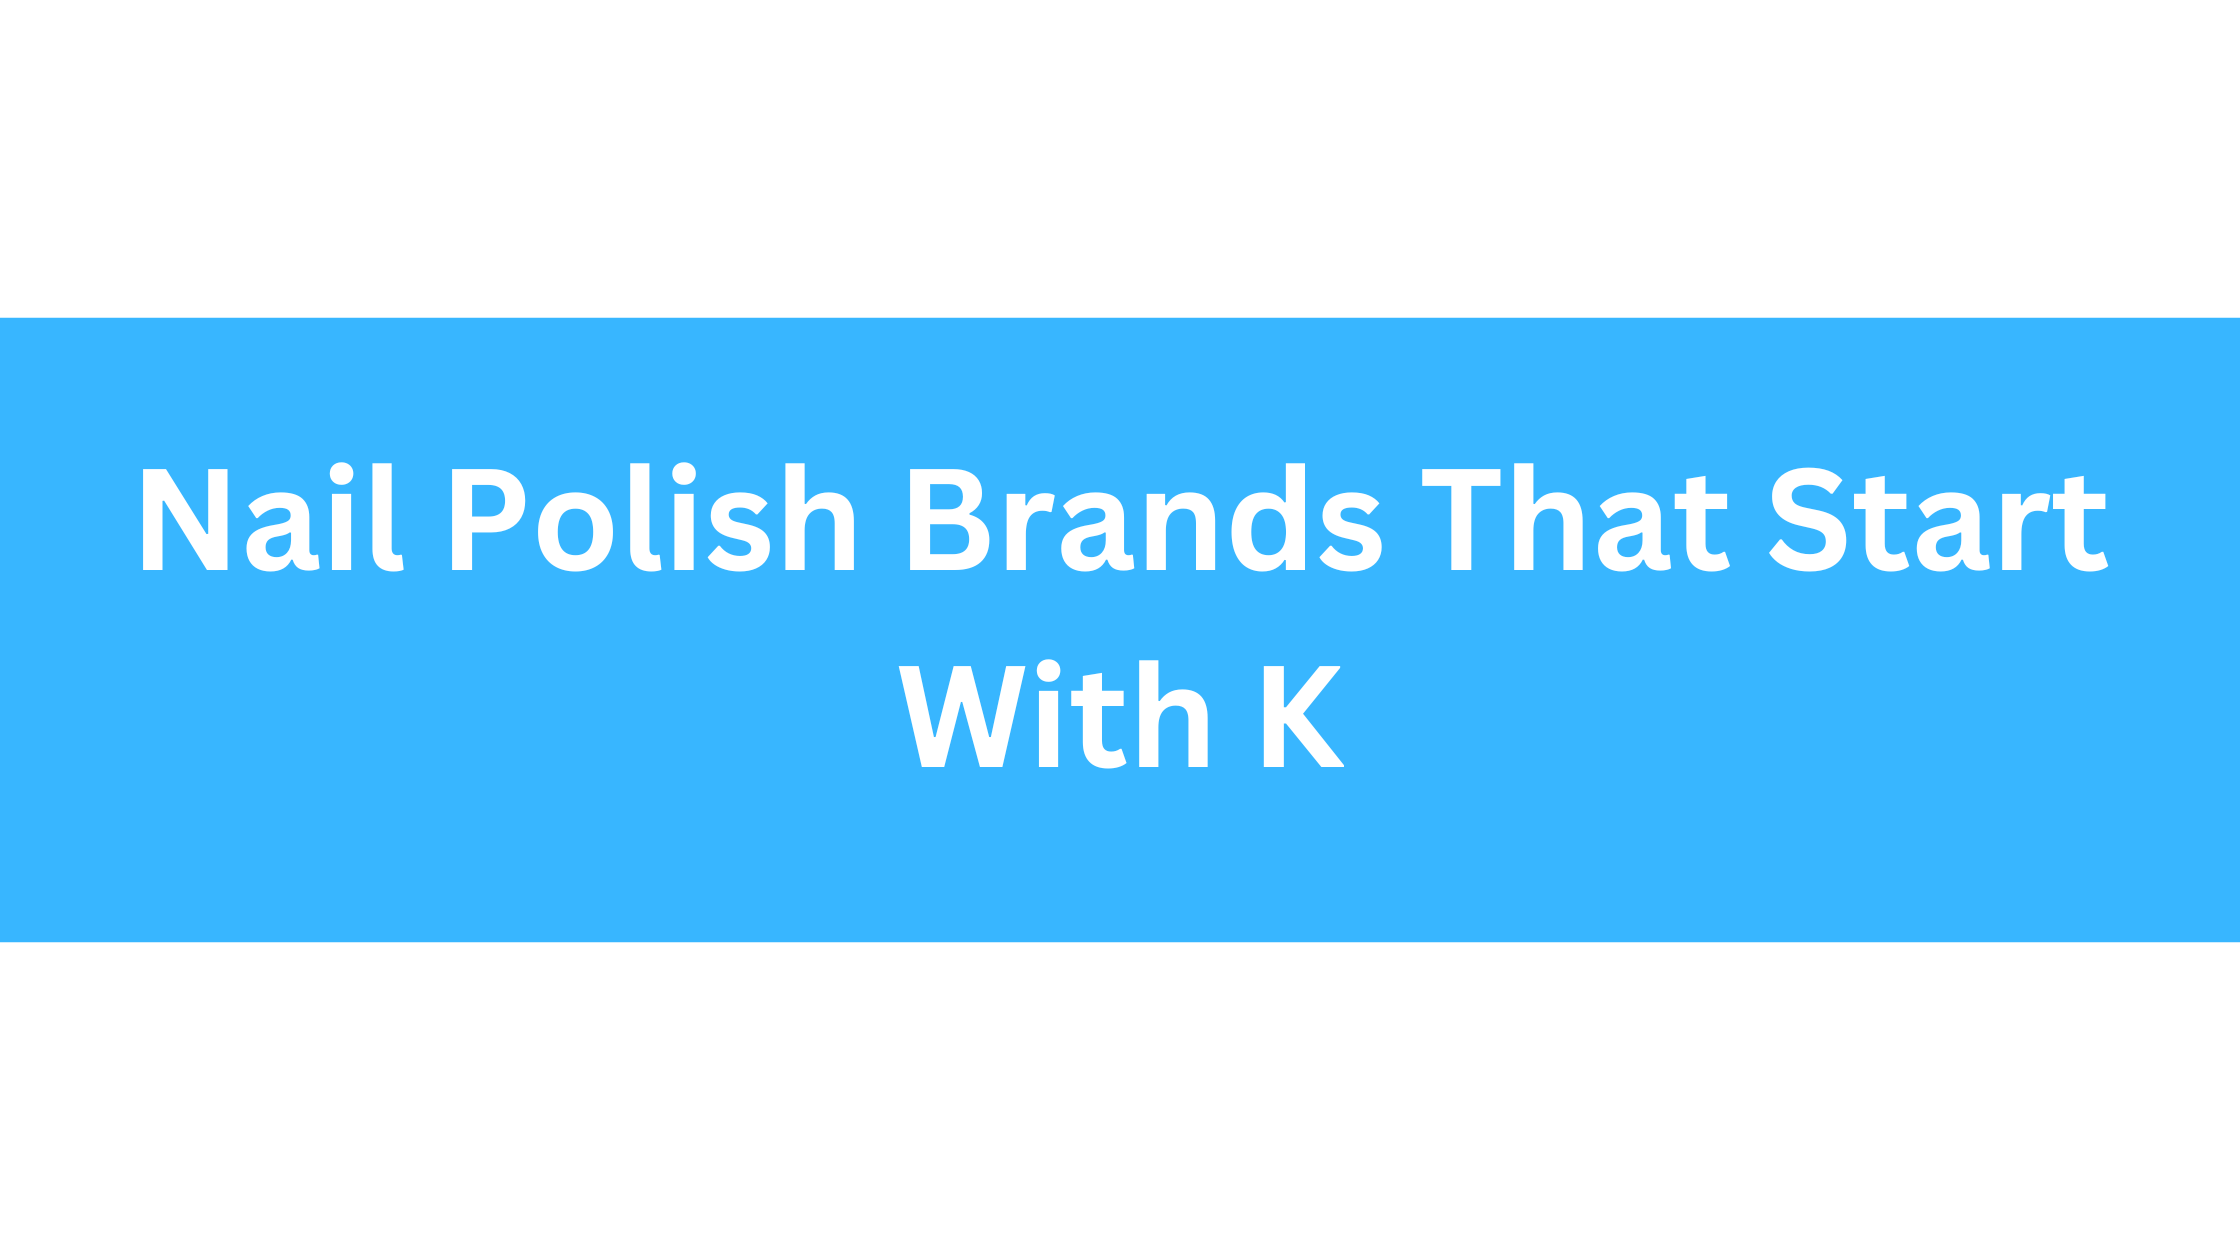 Nail Polish Brands That Start With K